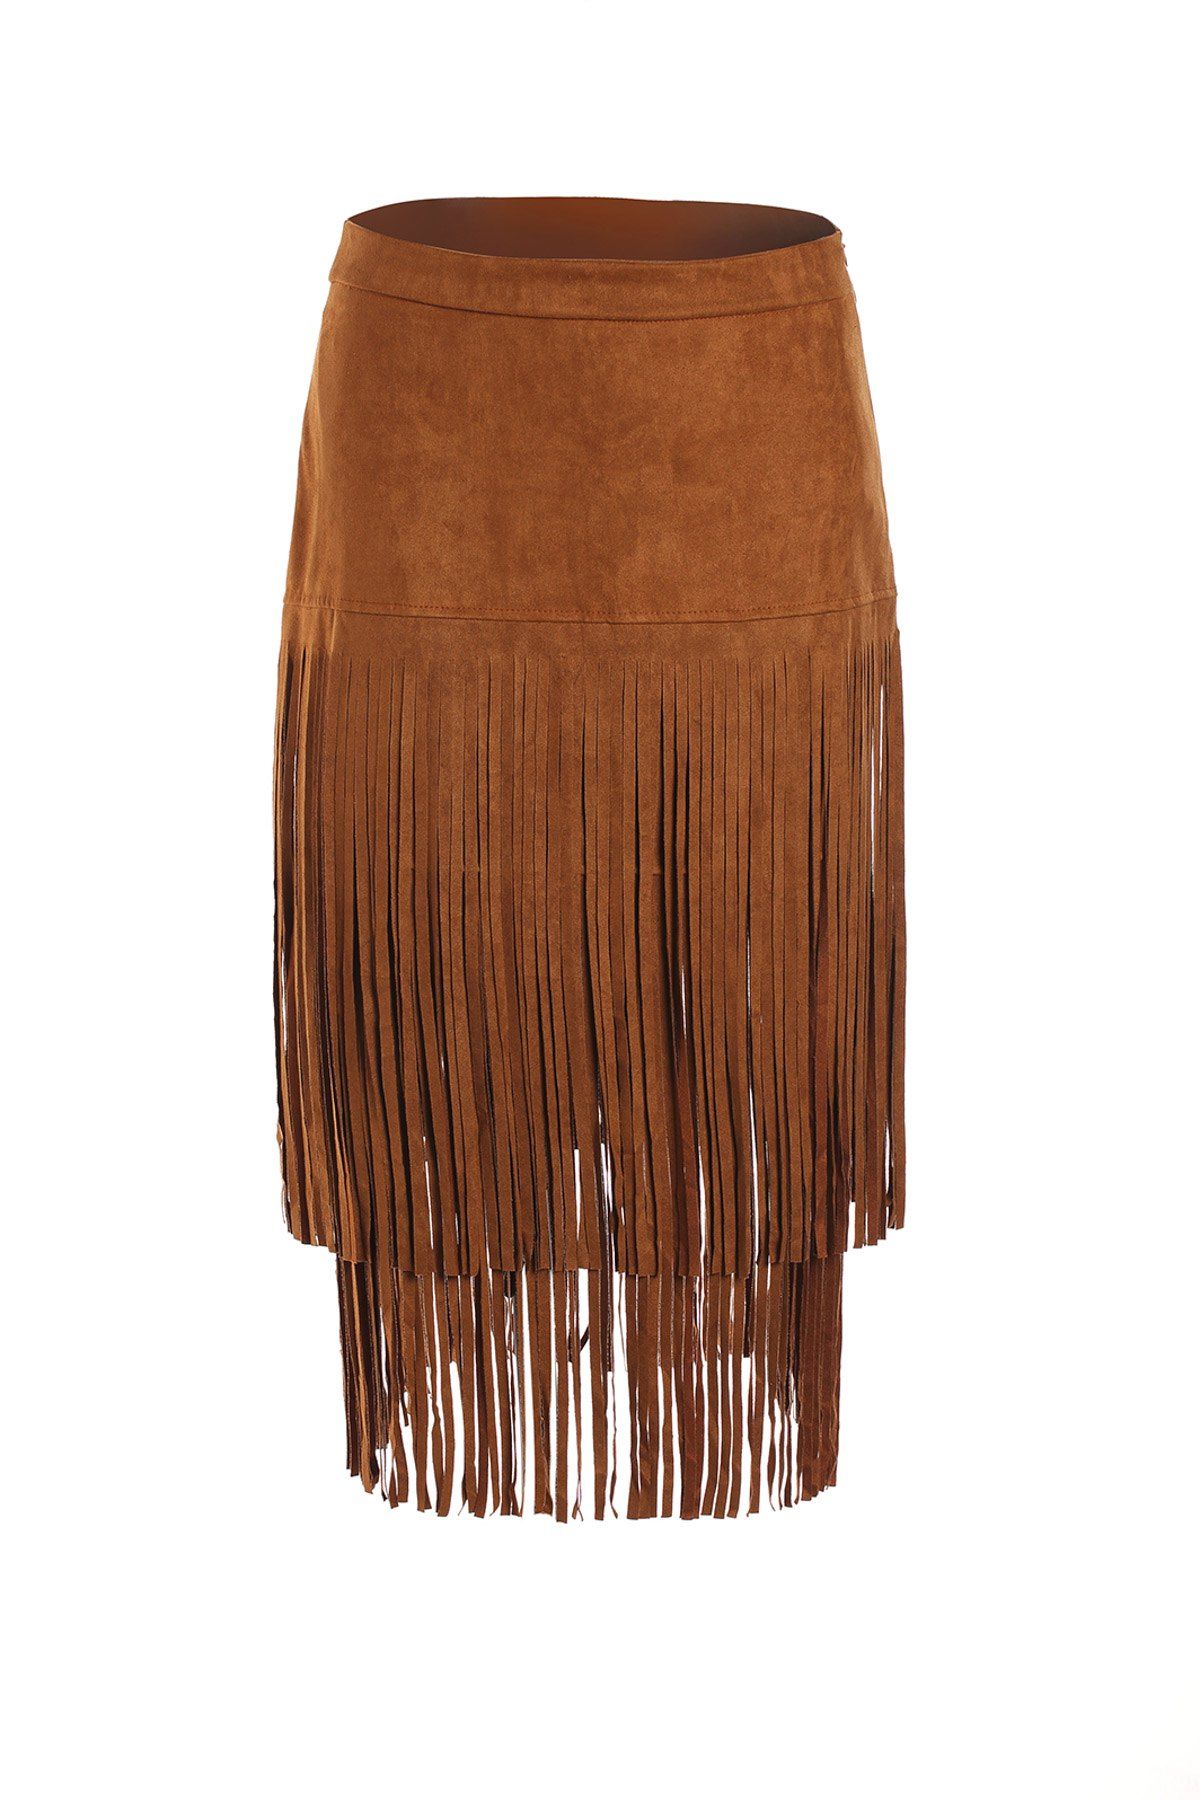 Store Stylish Multi-Layered Fringe Solid Color Suede Skirt For Women  